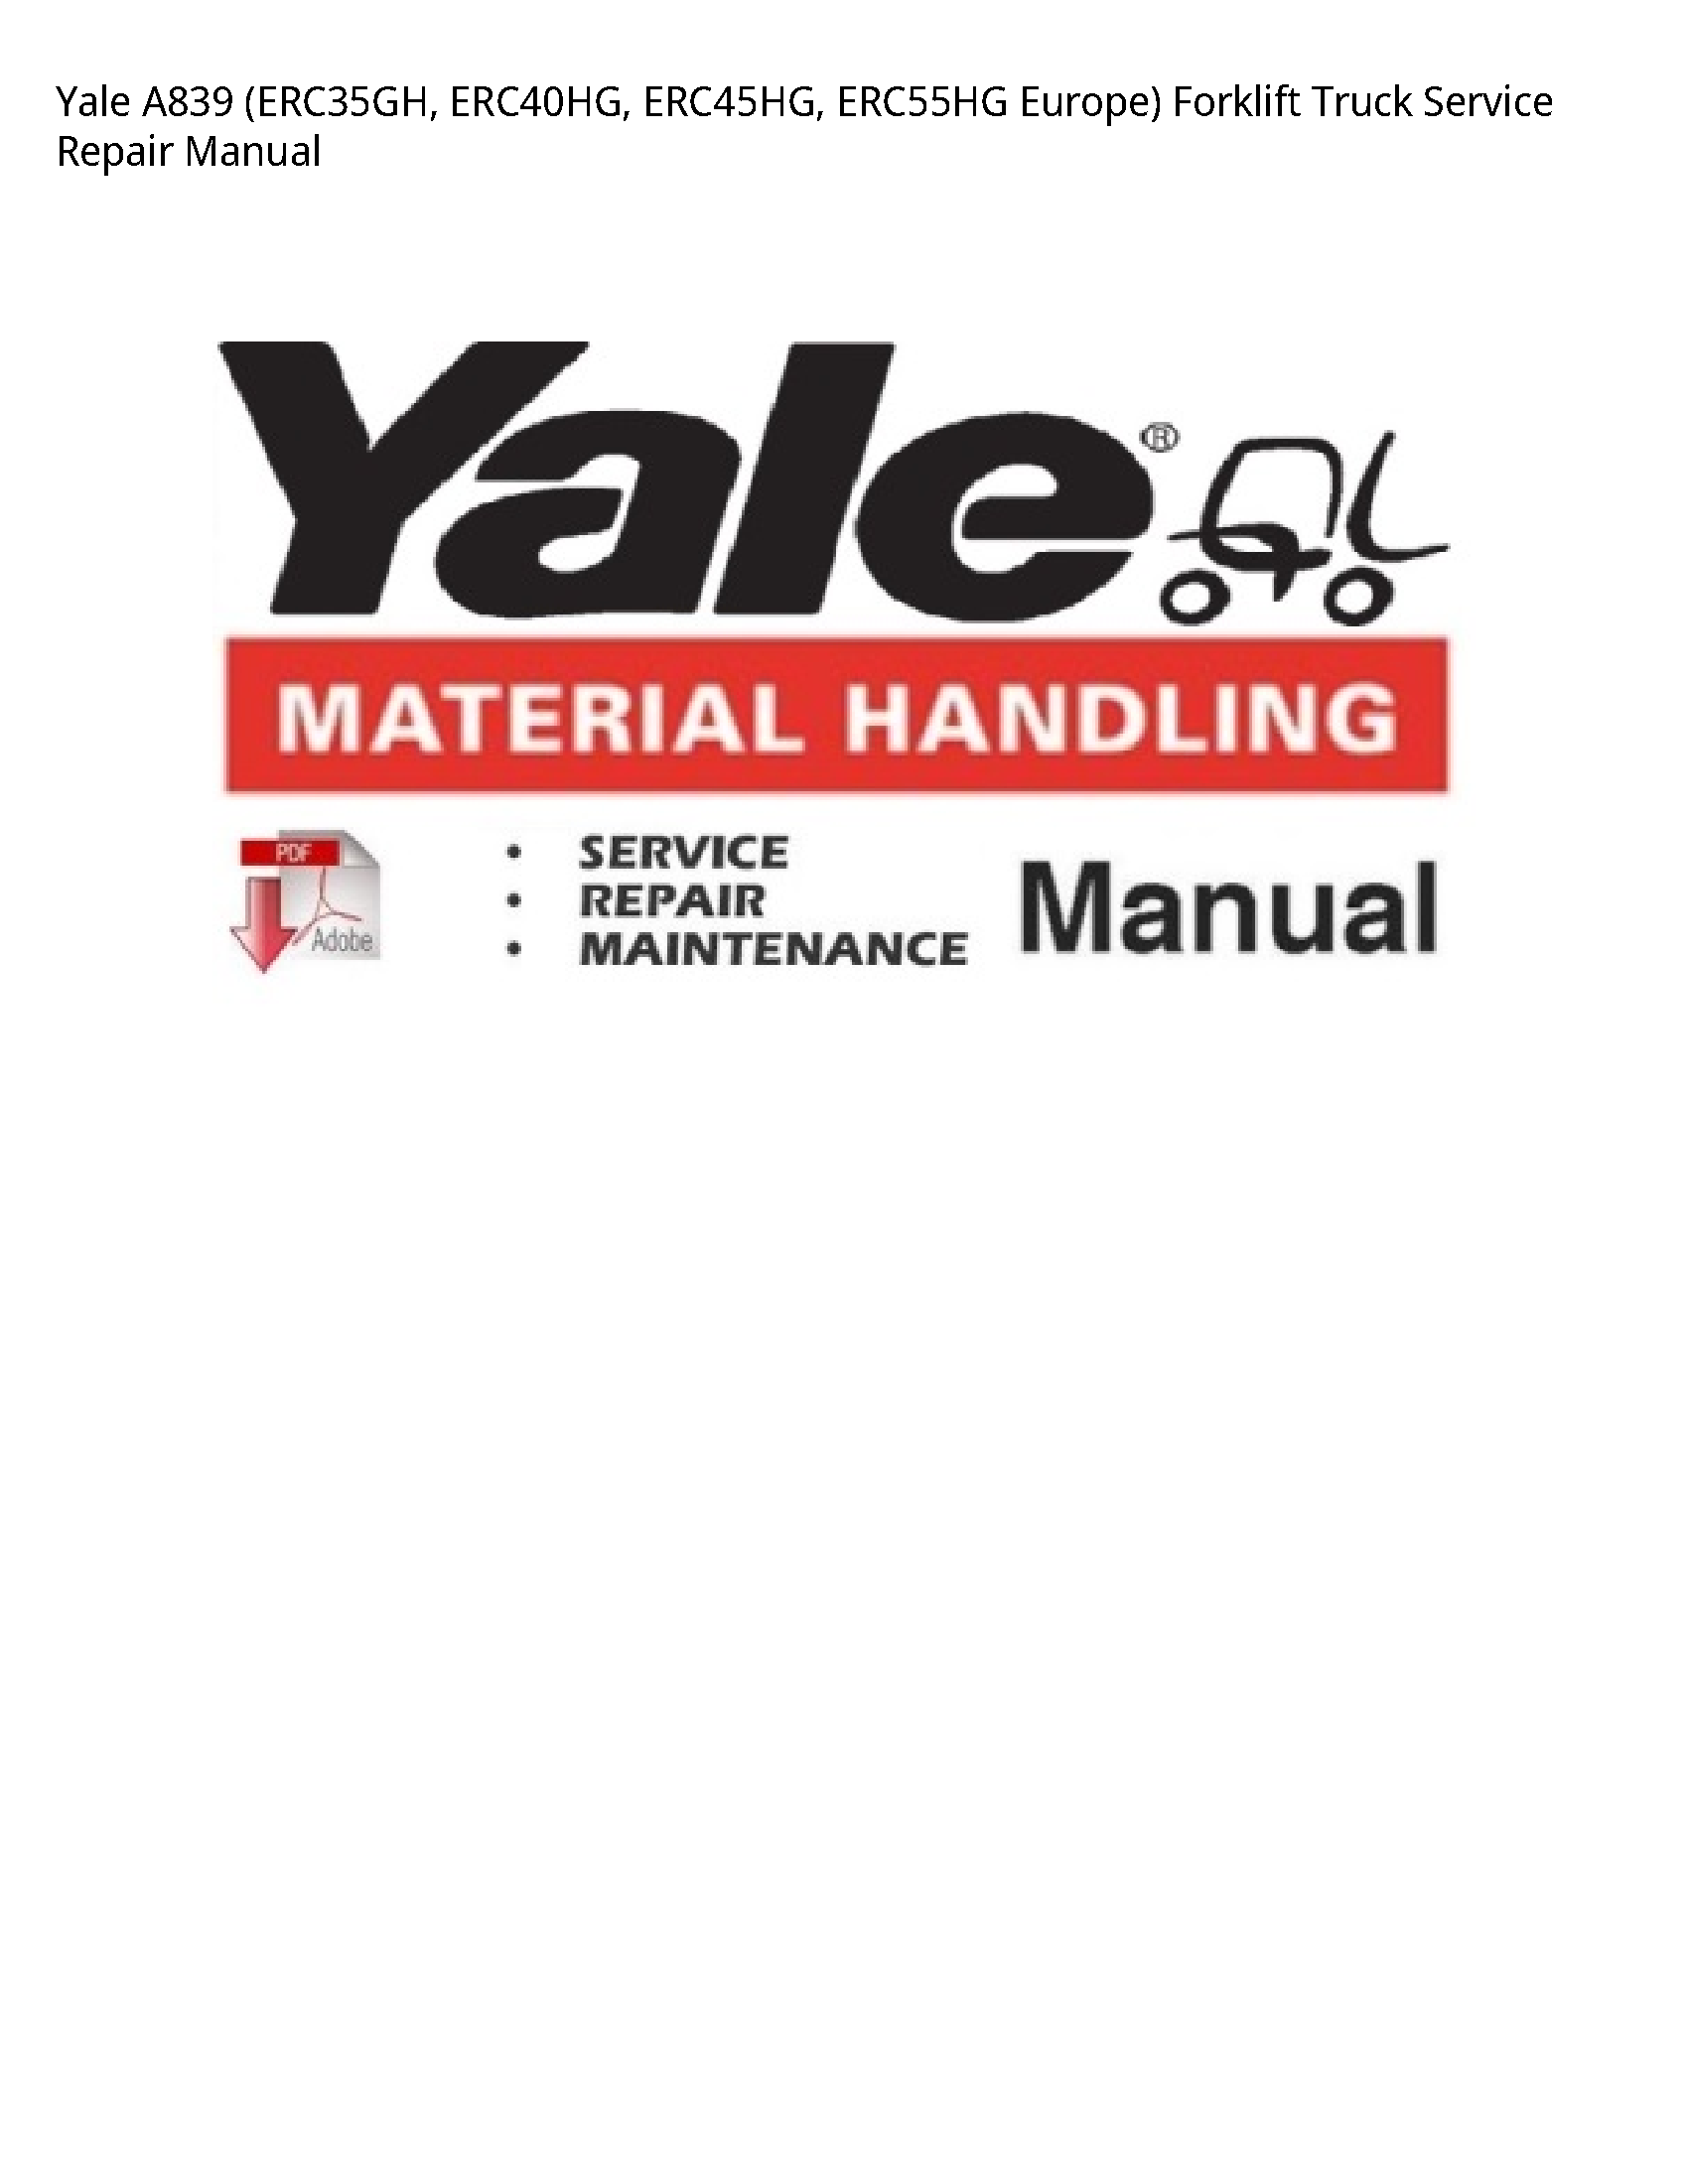 Yale A839 Europe) Forklift Truck manual